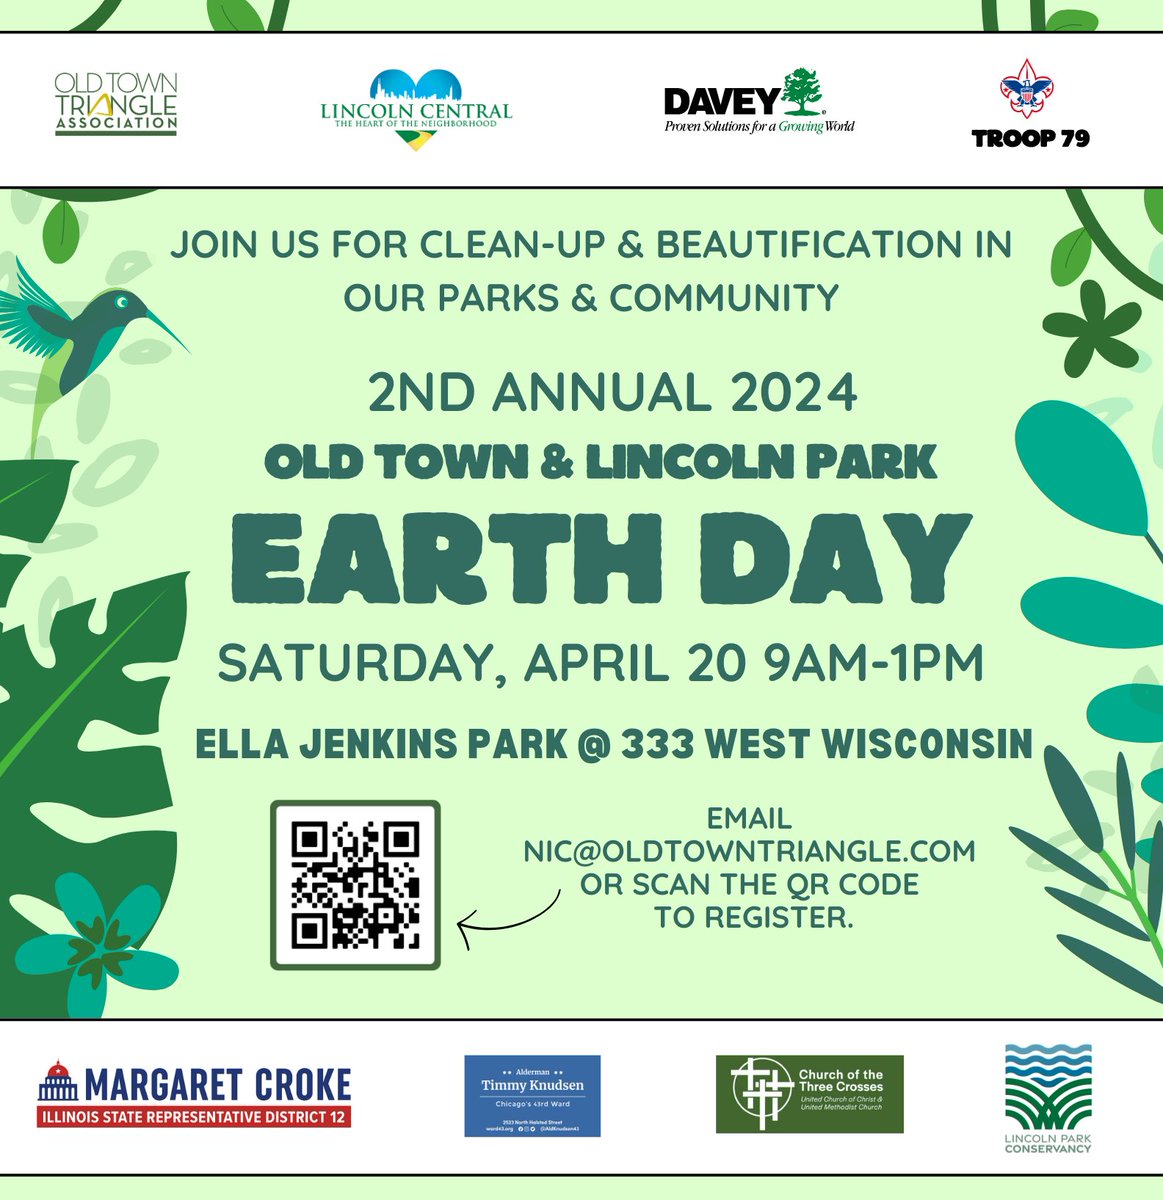 Thanks to everyone who signed up to volunteer with the Conservancy on Earth Day. Our three locations are now full! If you're looking for options: -Old Town Triangle Association clean-up at Ella Jenkins Park -Earth Day Wildflower Walk at North Pond. Tix: ow.ly/iLuk50R7JhP